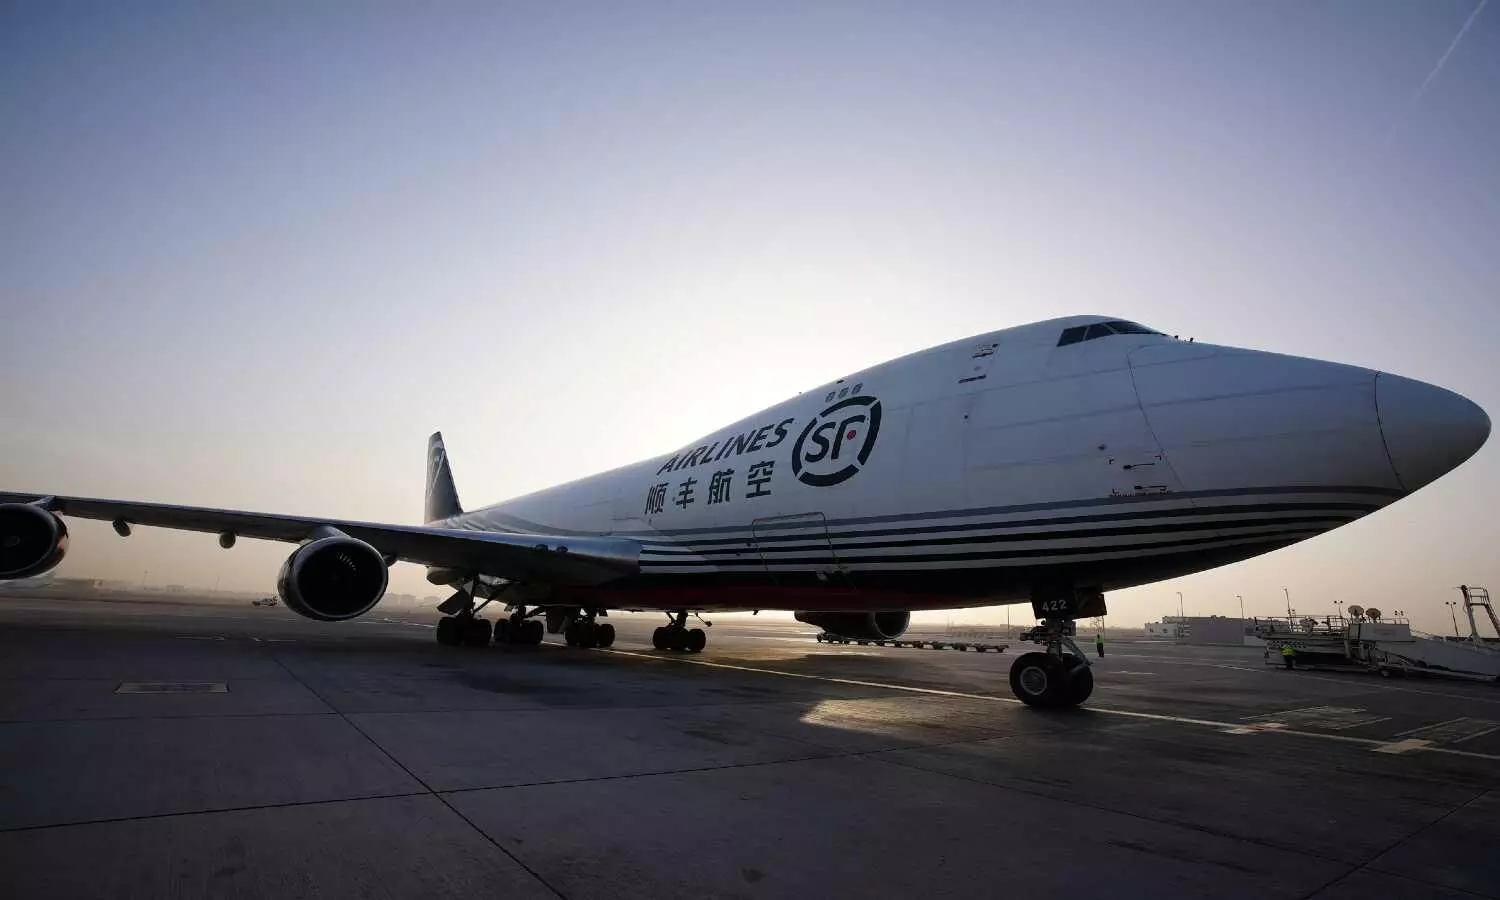 Abu Dhabi Airport welcomes first SF Express cargo flight